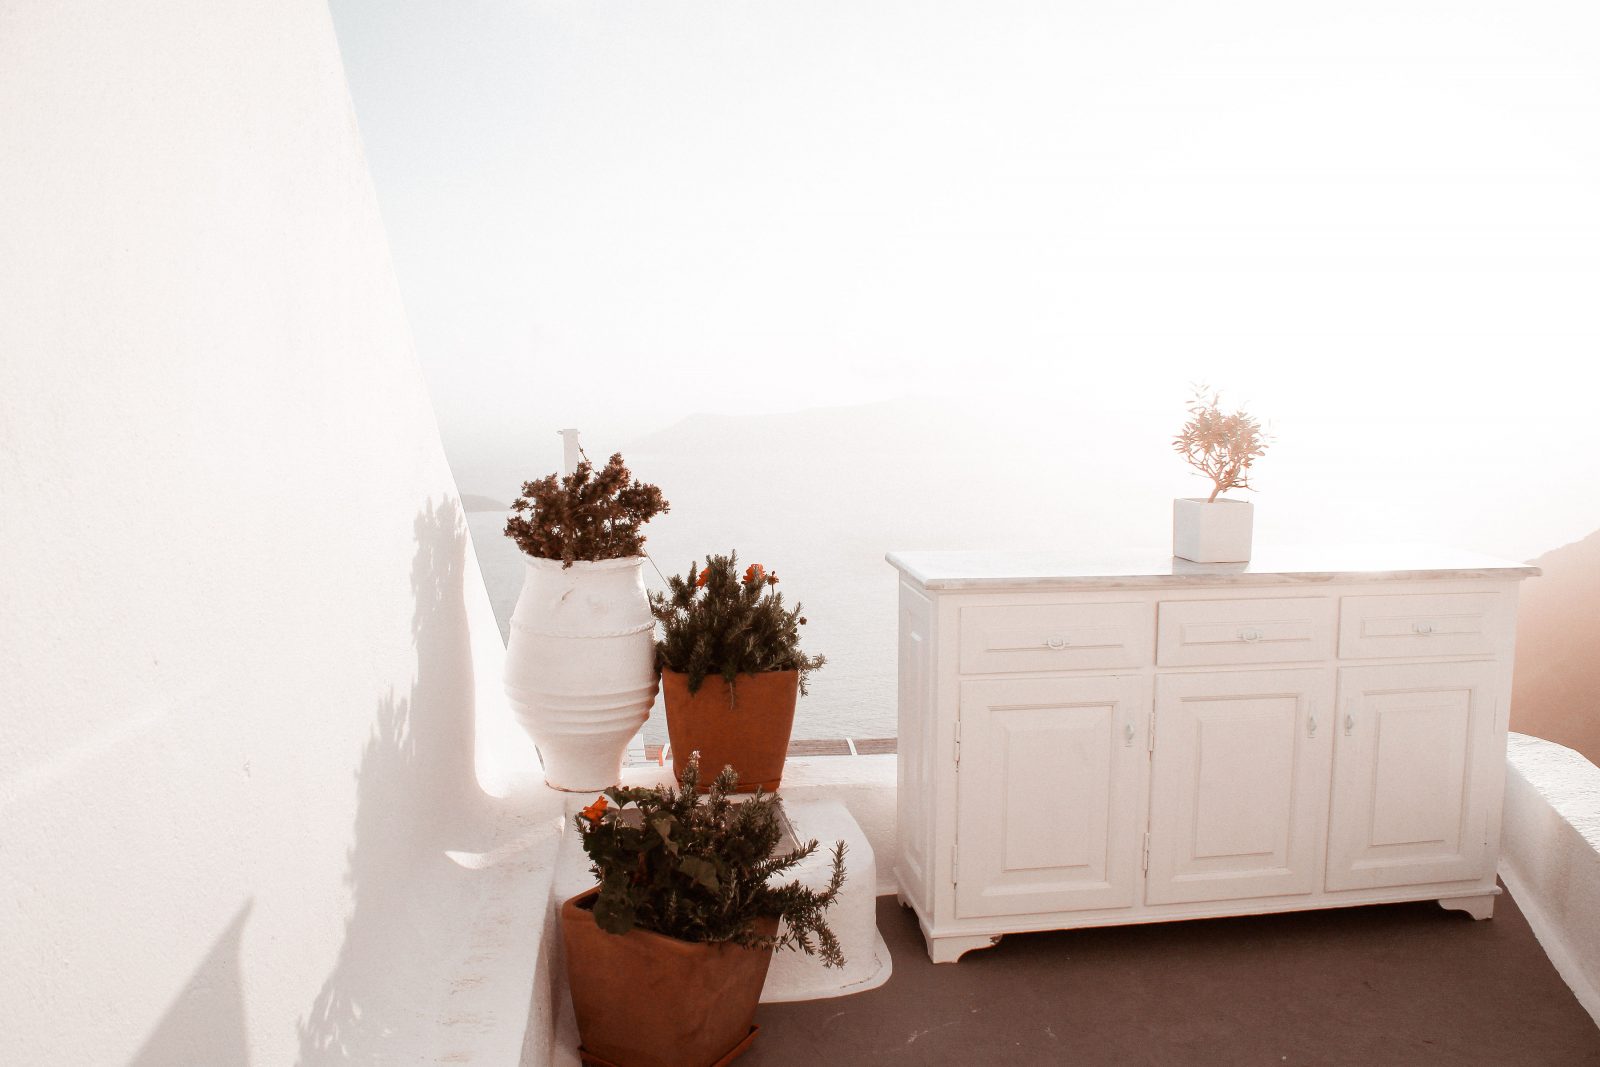 Vedema Luxury Collection resort in Santorini Greece, photographed by Alaina Mullin